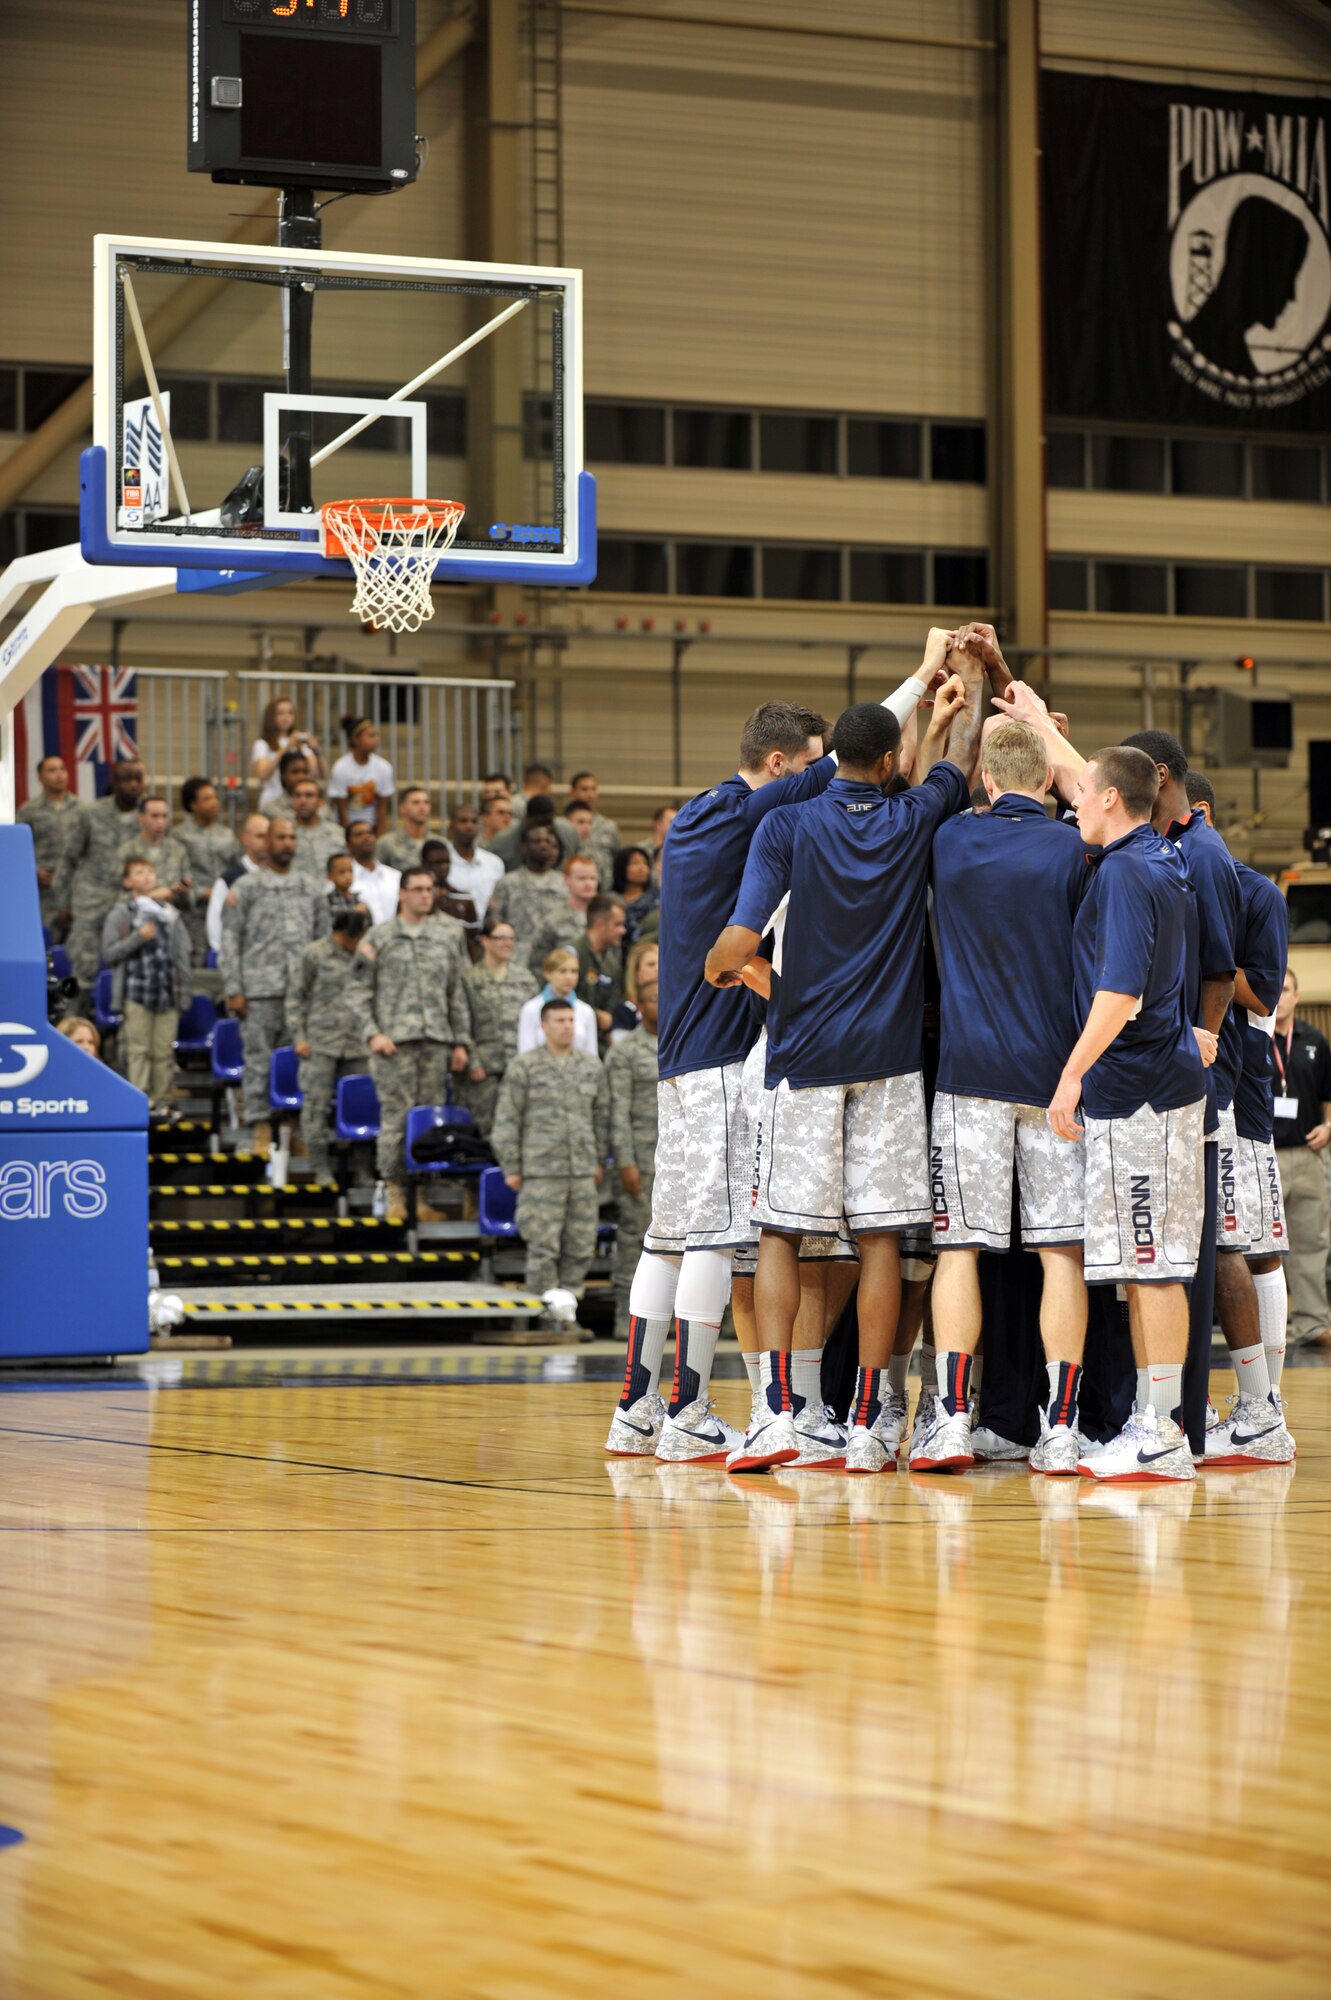 Team members from University of Connecticut have a pre game huddle at the 2012 Armed Forces Classic on Ramstein Air Base, Germany, Nov. 10, 2012. The match-up between Michigan State and UCONN is part of ESPN's Veteran's week initiative to honor the men and women who have served and are still serving in the U.S. military. (U.S. Air Force photo/Senior Airman Caitlin O’Neil-McKeown)
